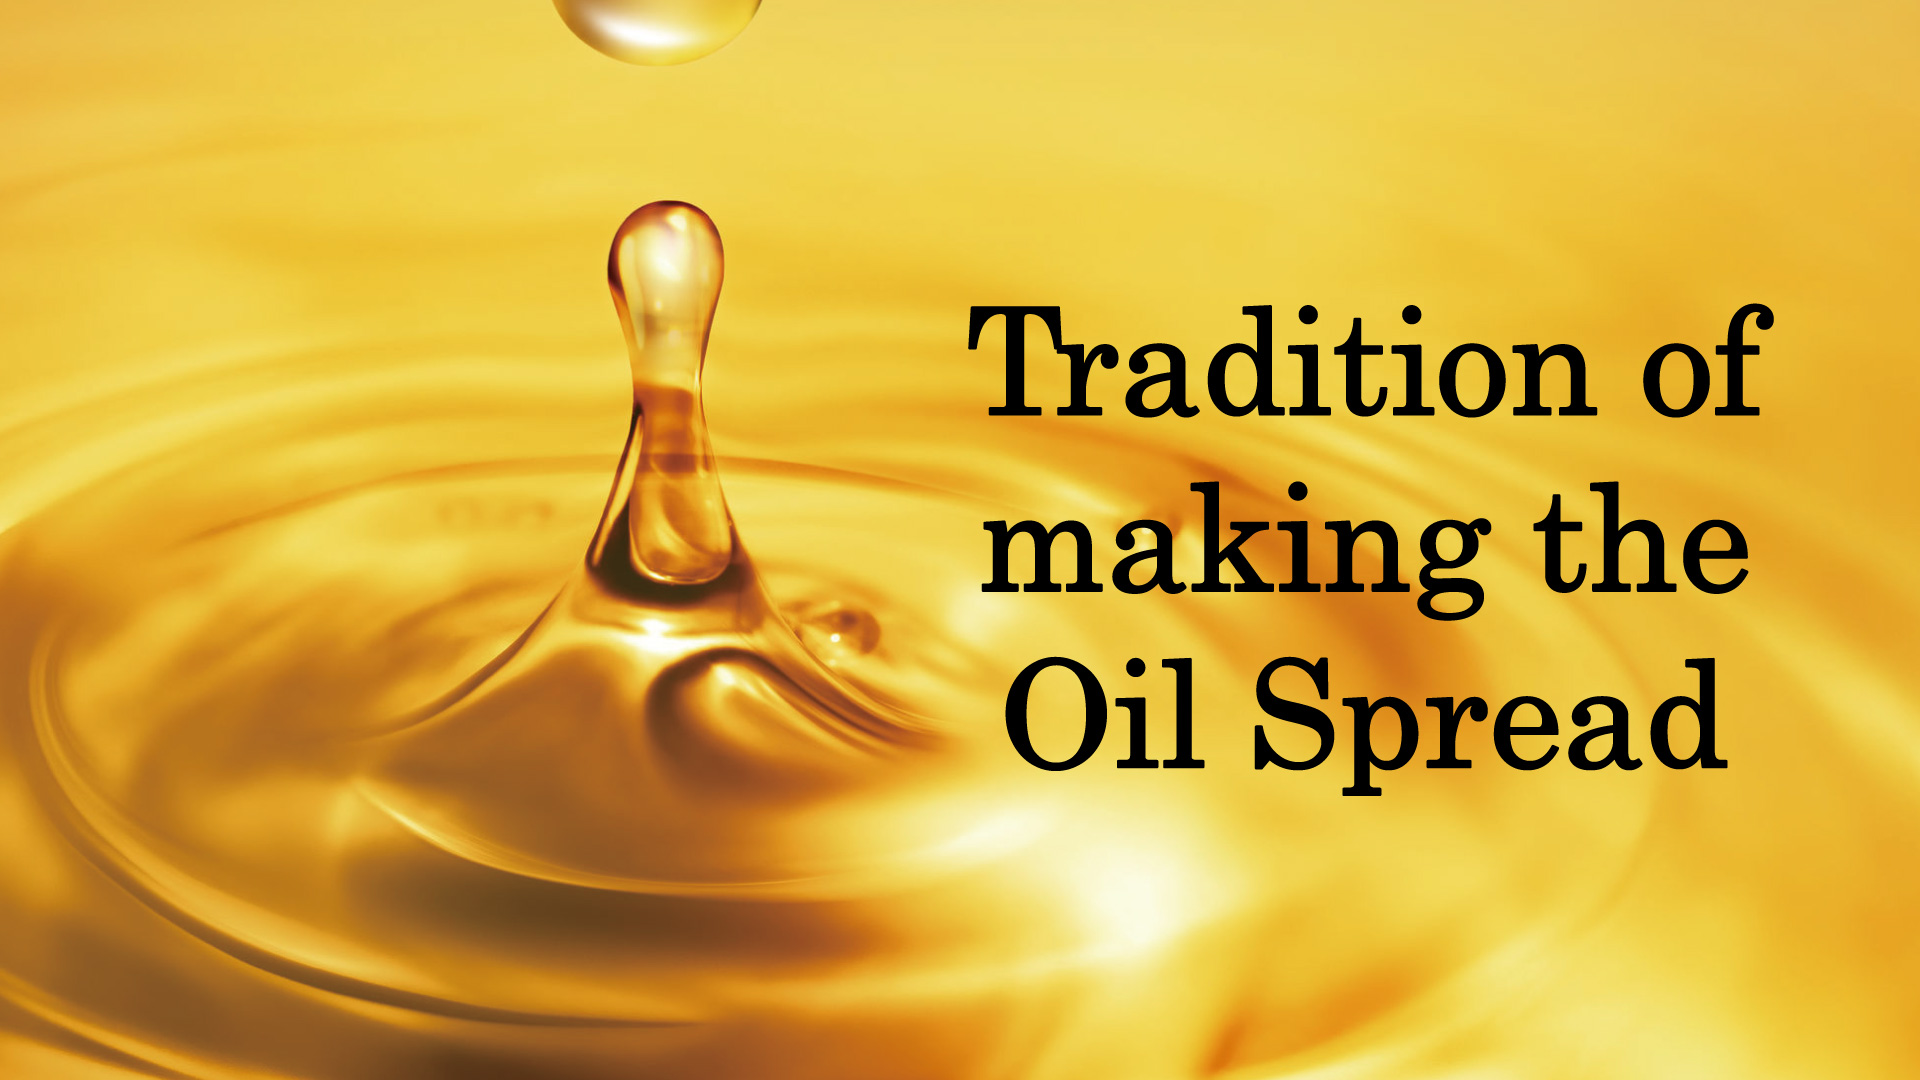 Traditional oil spread WORLD